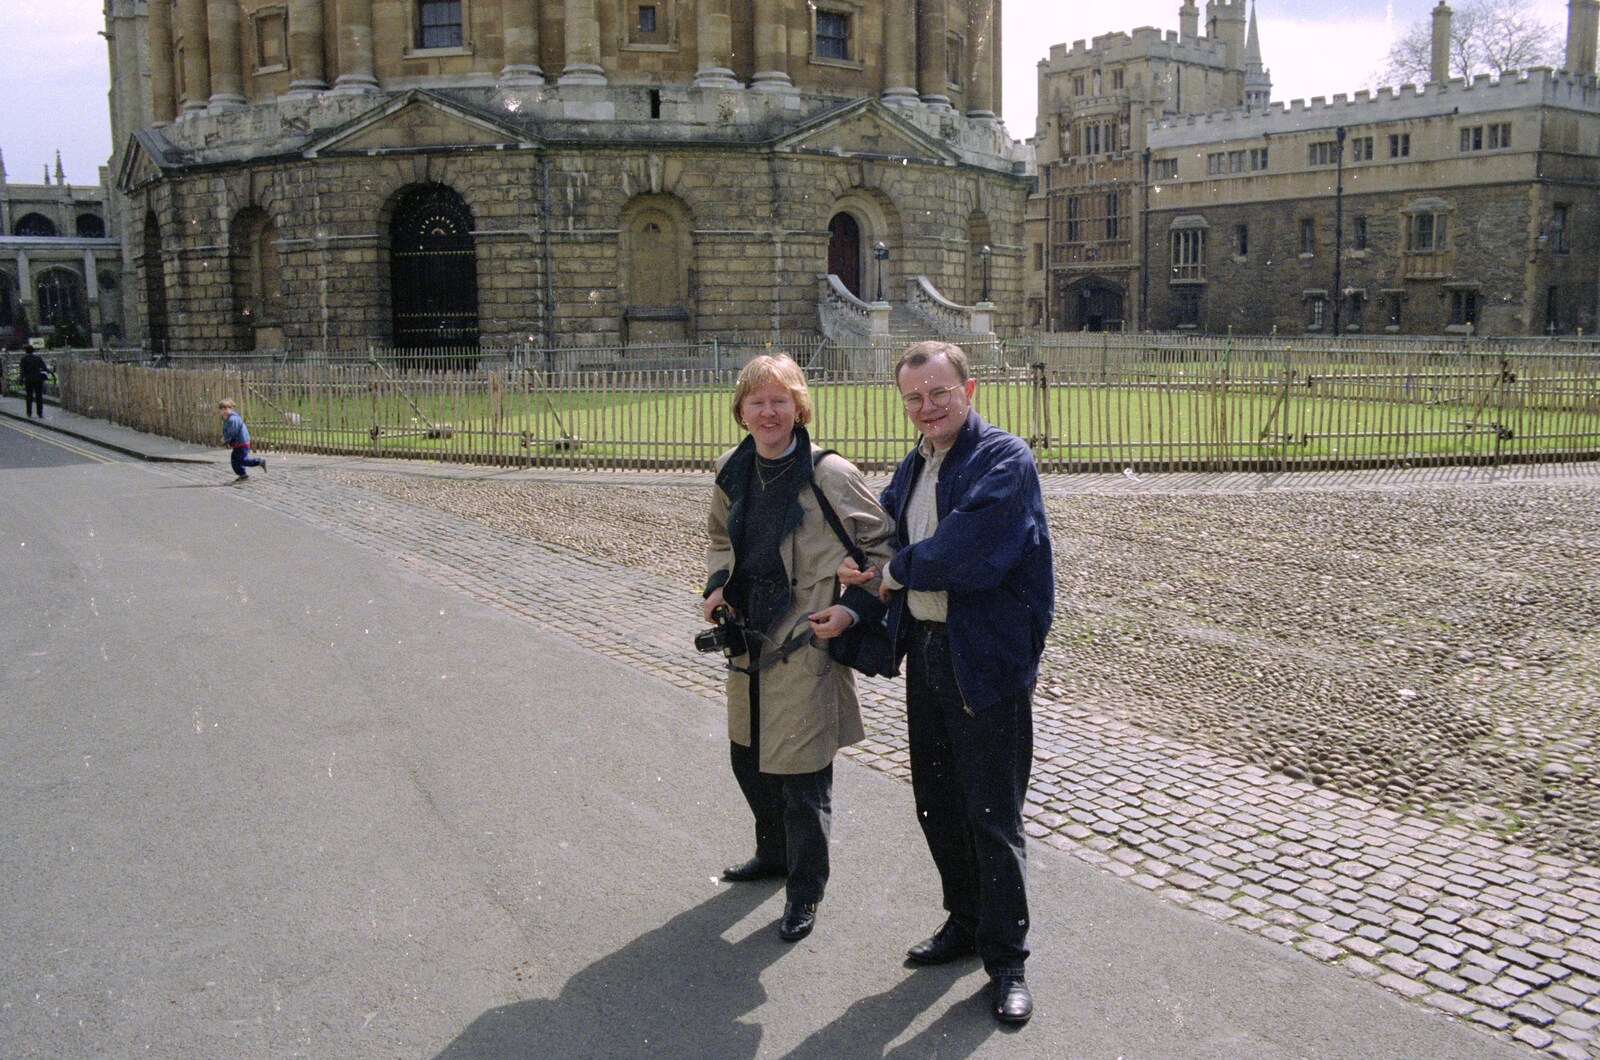 Hamish's Oxford Party, Oxfordshire - 25th April 1992: Hamish and his mate mill around outside the Radcliffe Library